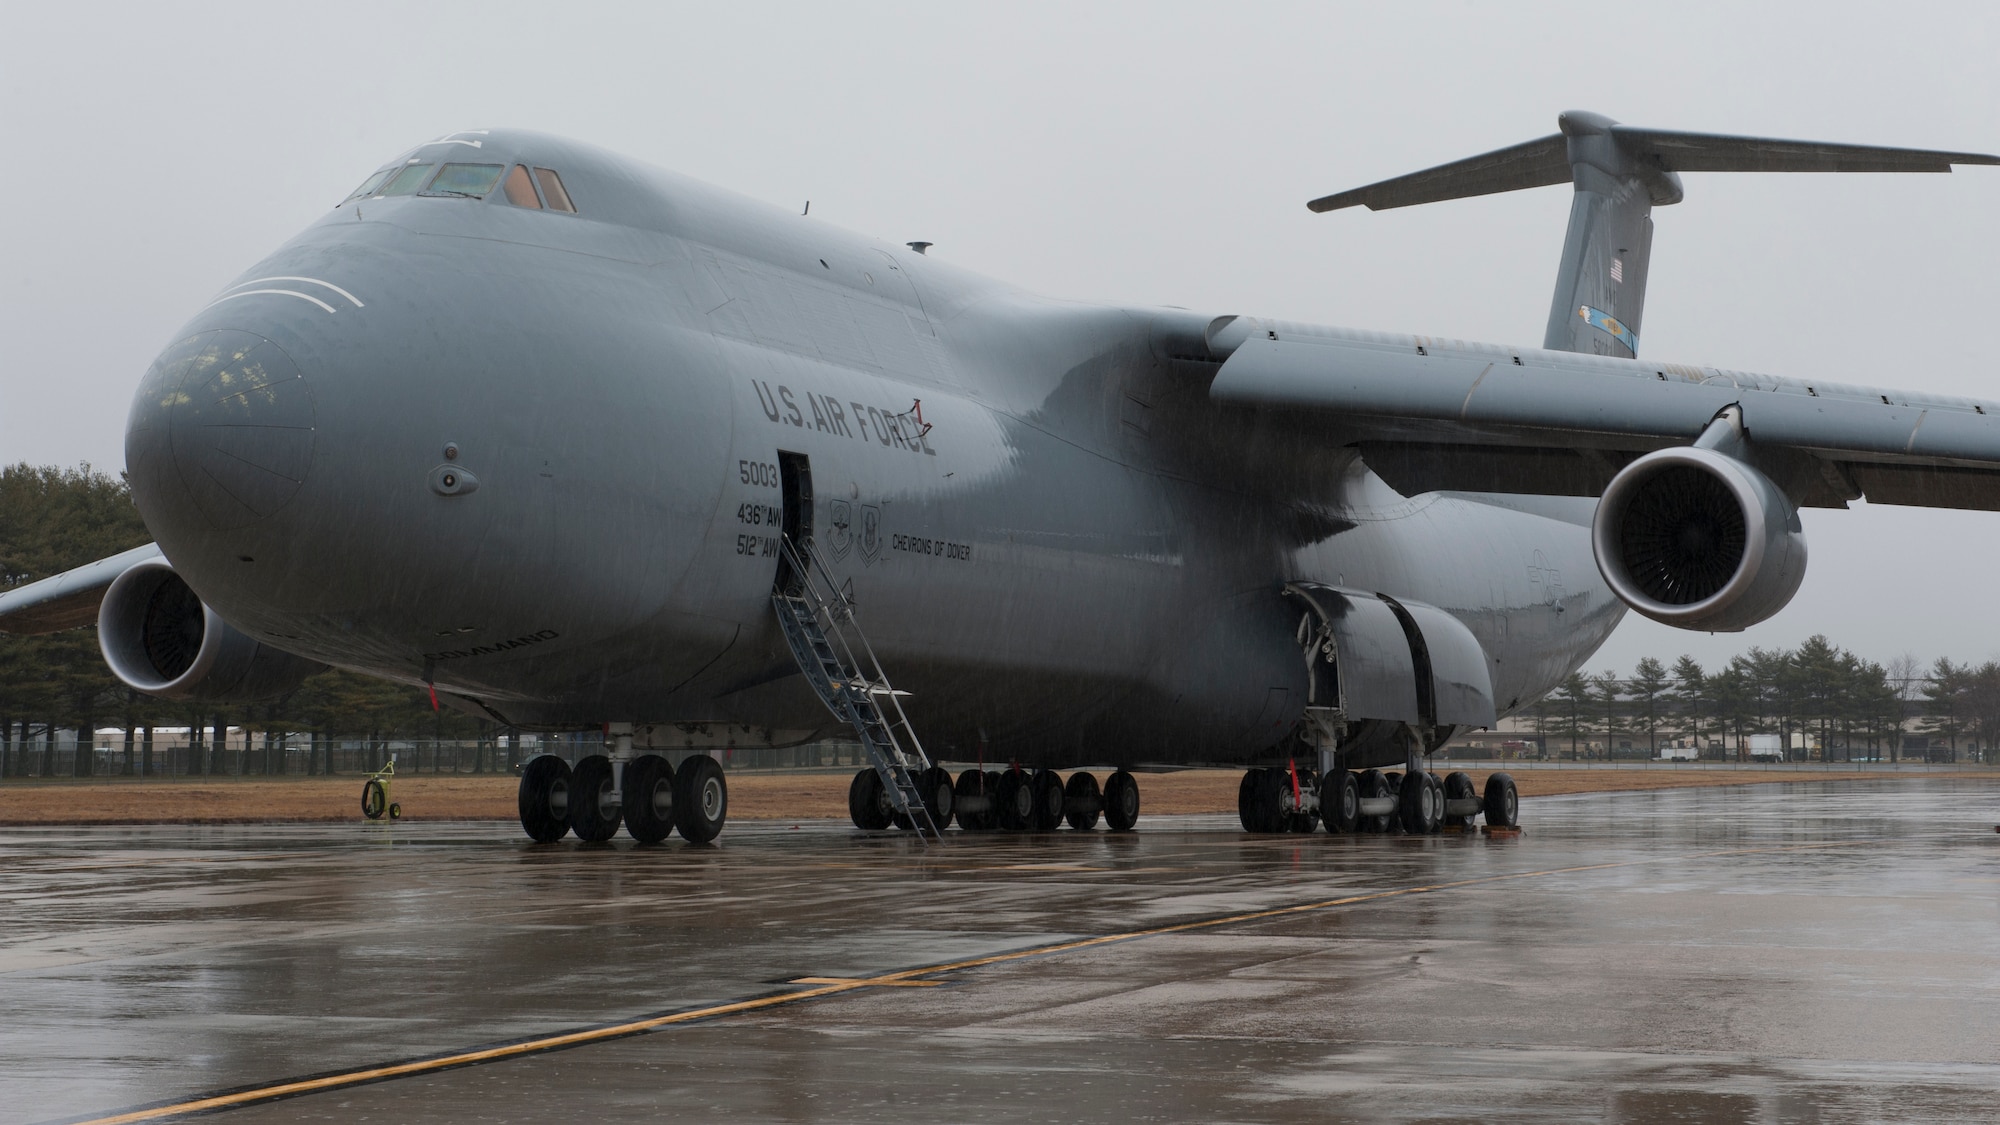 A C-5M Super Galaxy, operated by the 436th Airlift Wing, sits on the flight line Feb. 24, 2016, at Joint Base McGuire-Dix-Lakehurst, N.J. The Home-Station Logistics Departure Reliability Rate over the past 12 month period was 88.1 percent and over the past 24 month period was 87 percent. (U.S. Air Force photo/Senior Airman Zachary Cacicia)